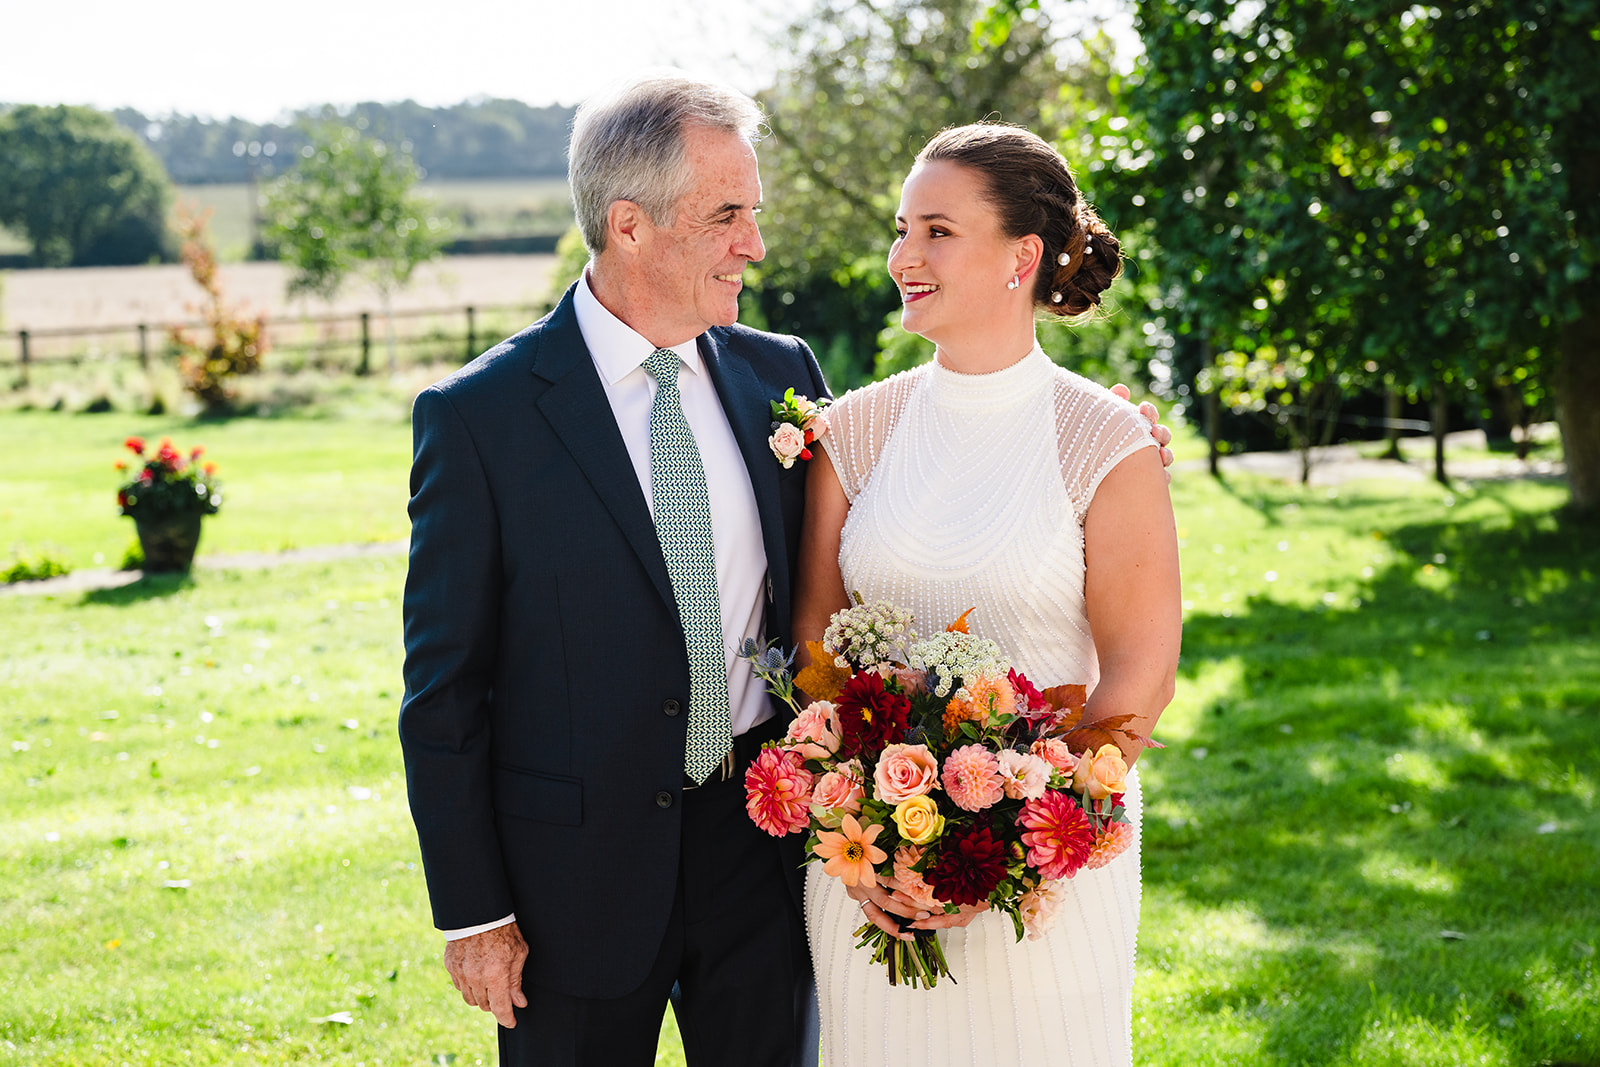 Bride and her father stood looking at each other in the garden